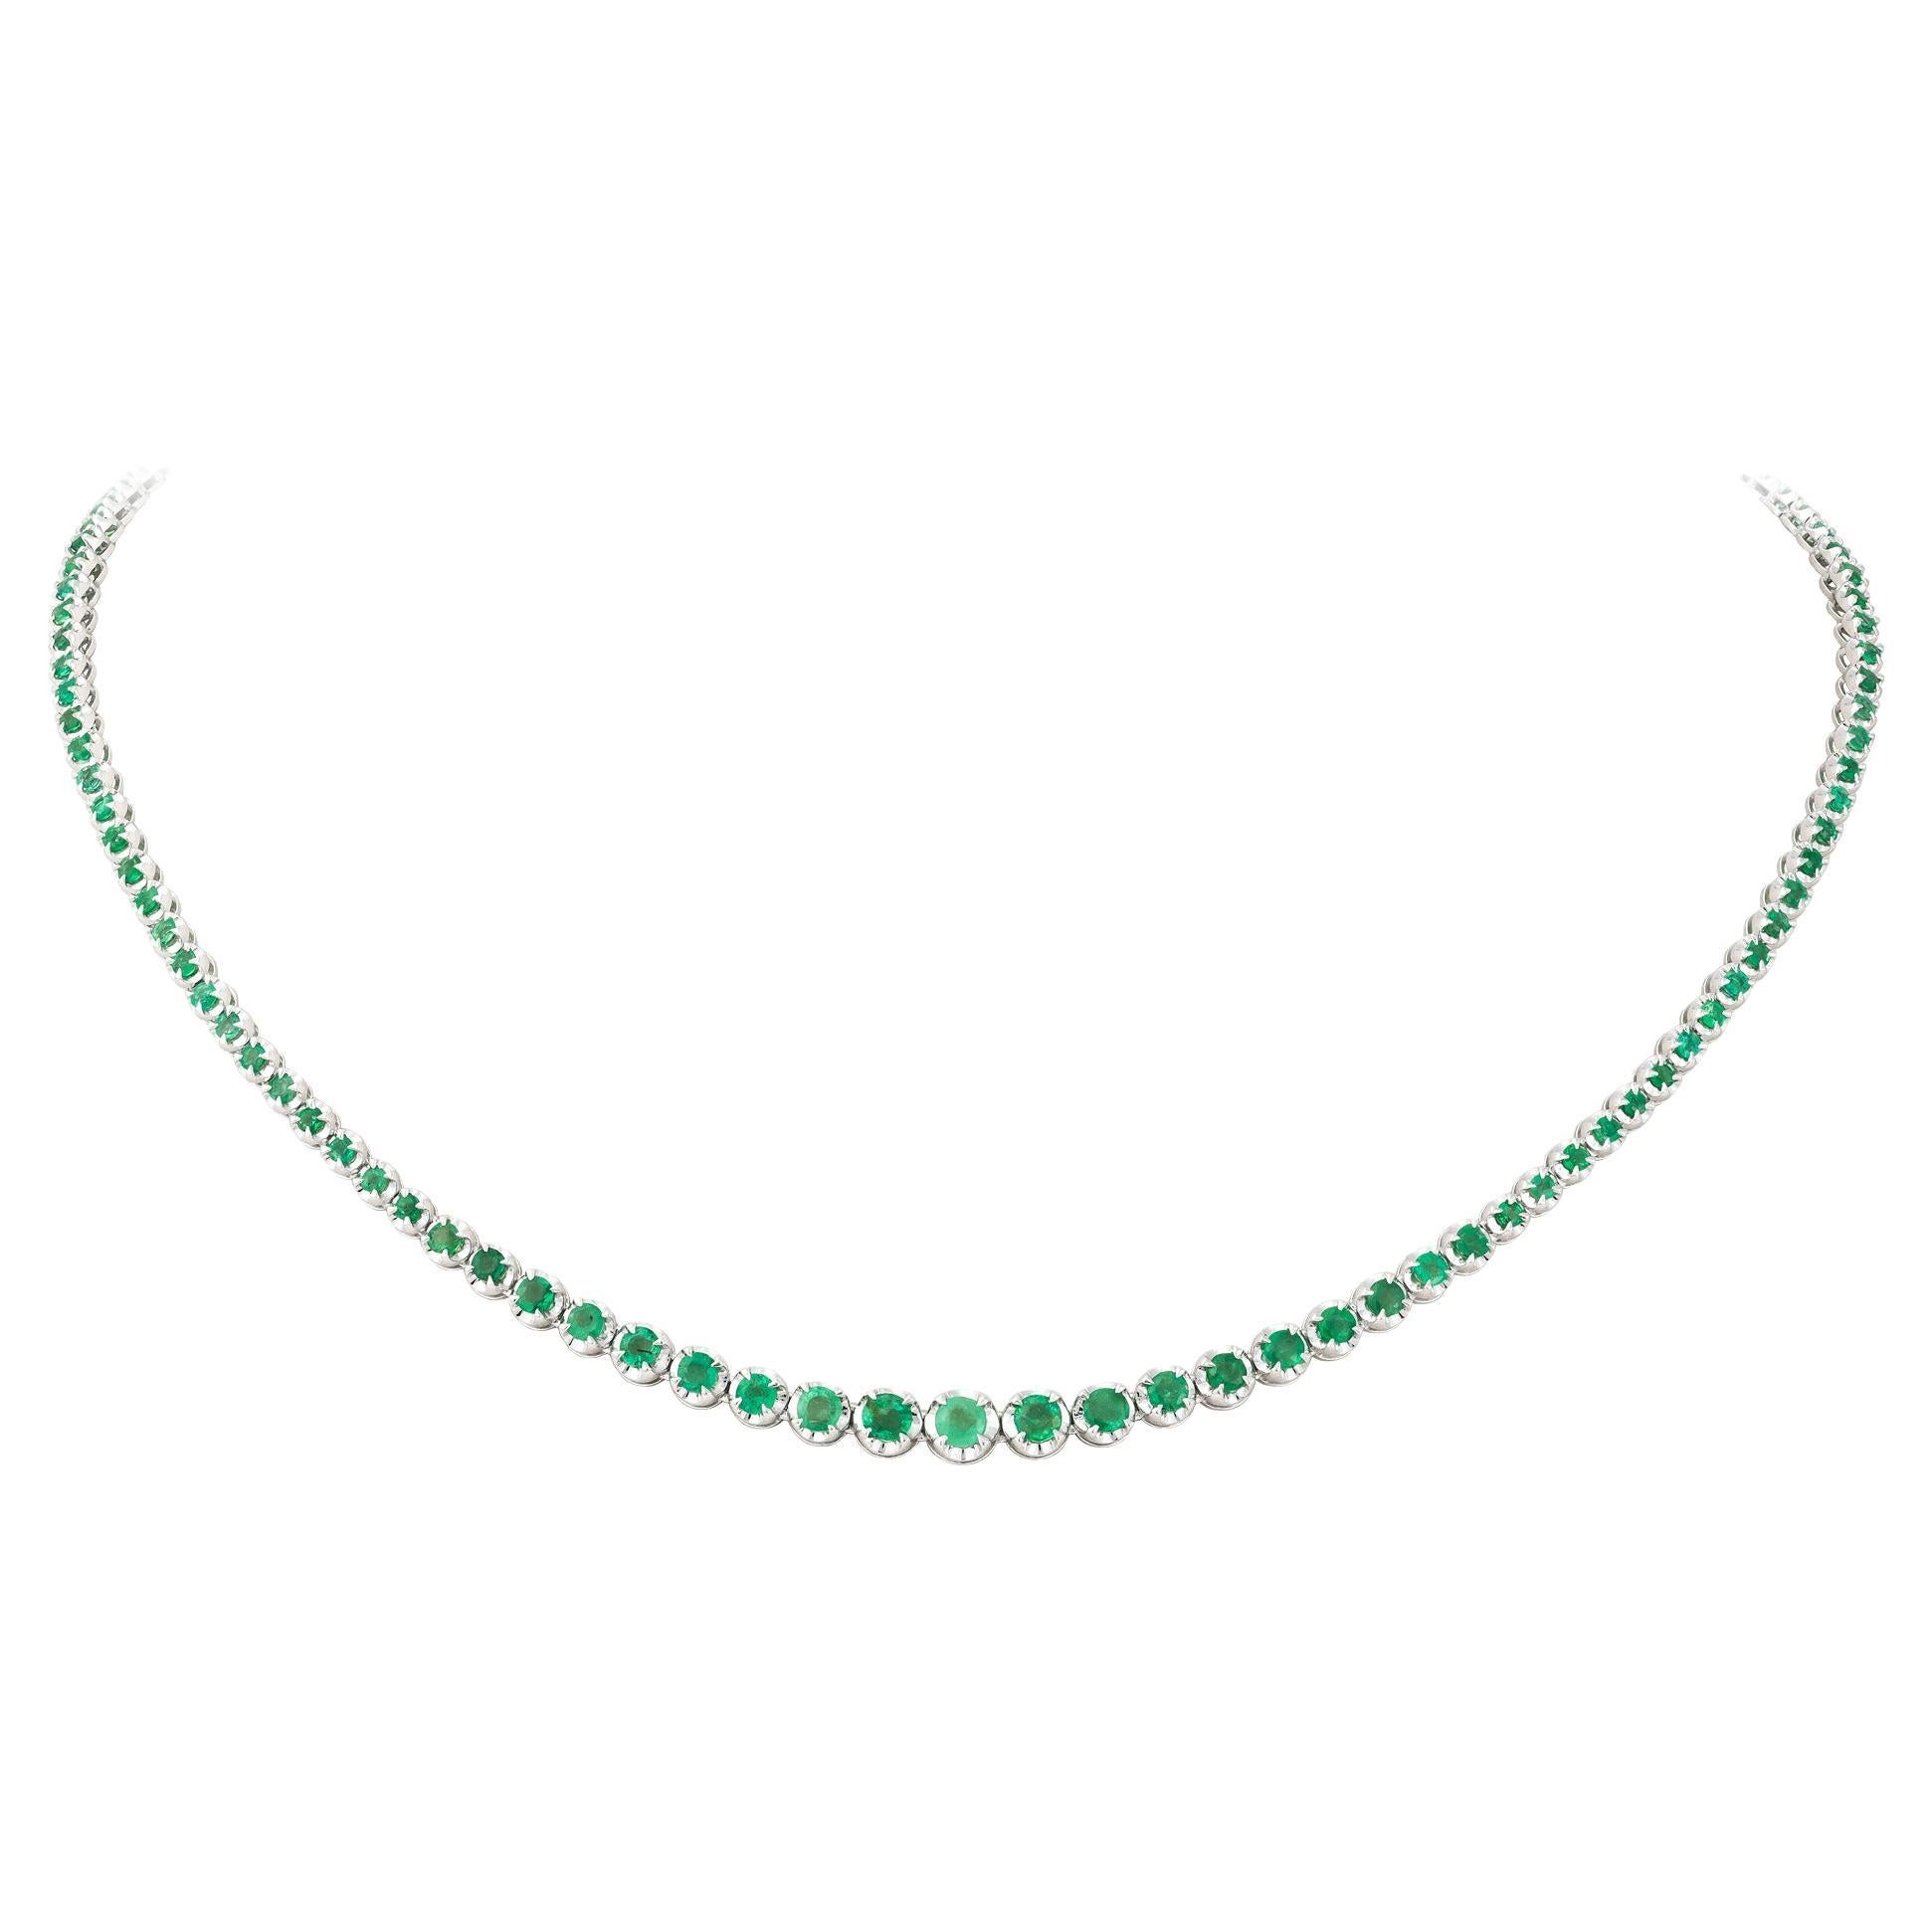 NWT $9, 600 Rare Gorgeous 18KT Fancy Emerald Diamond Riviera Tennis Necklace For Sale